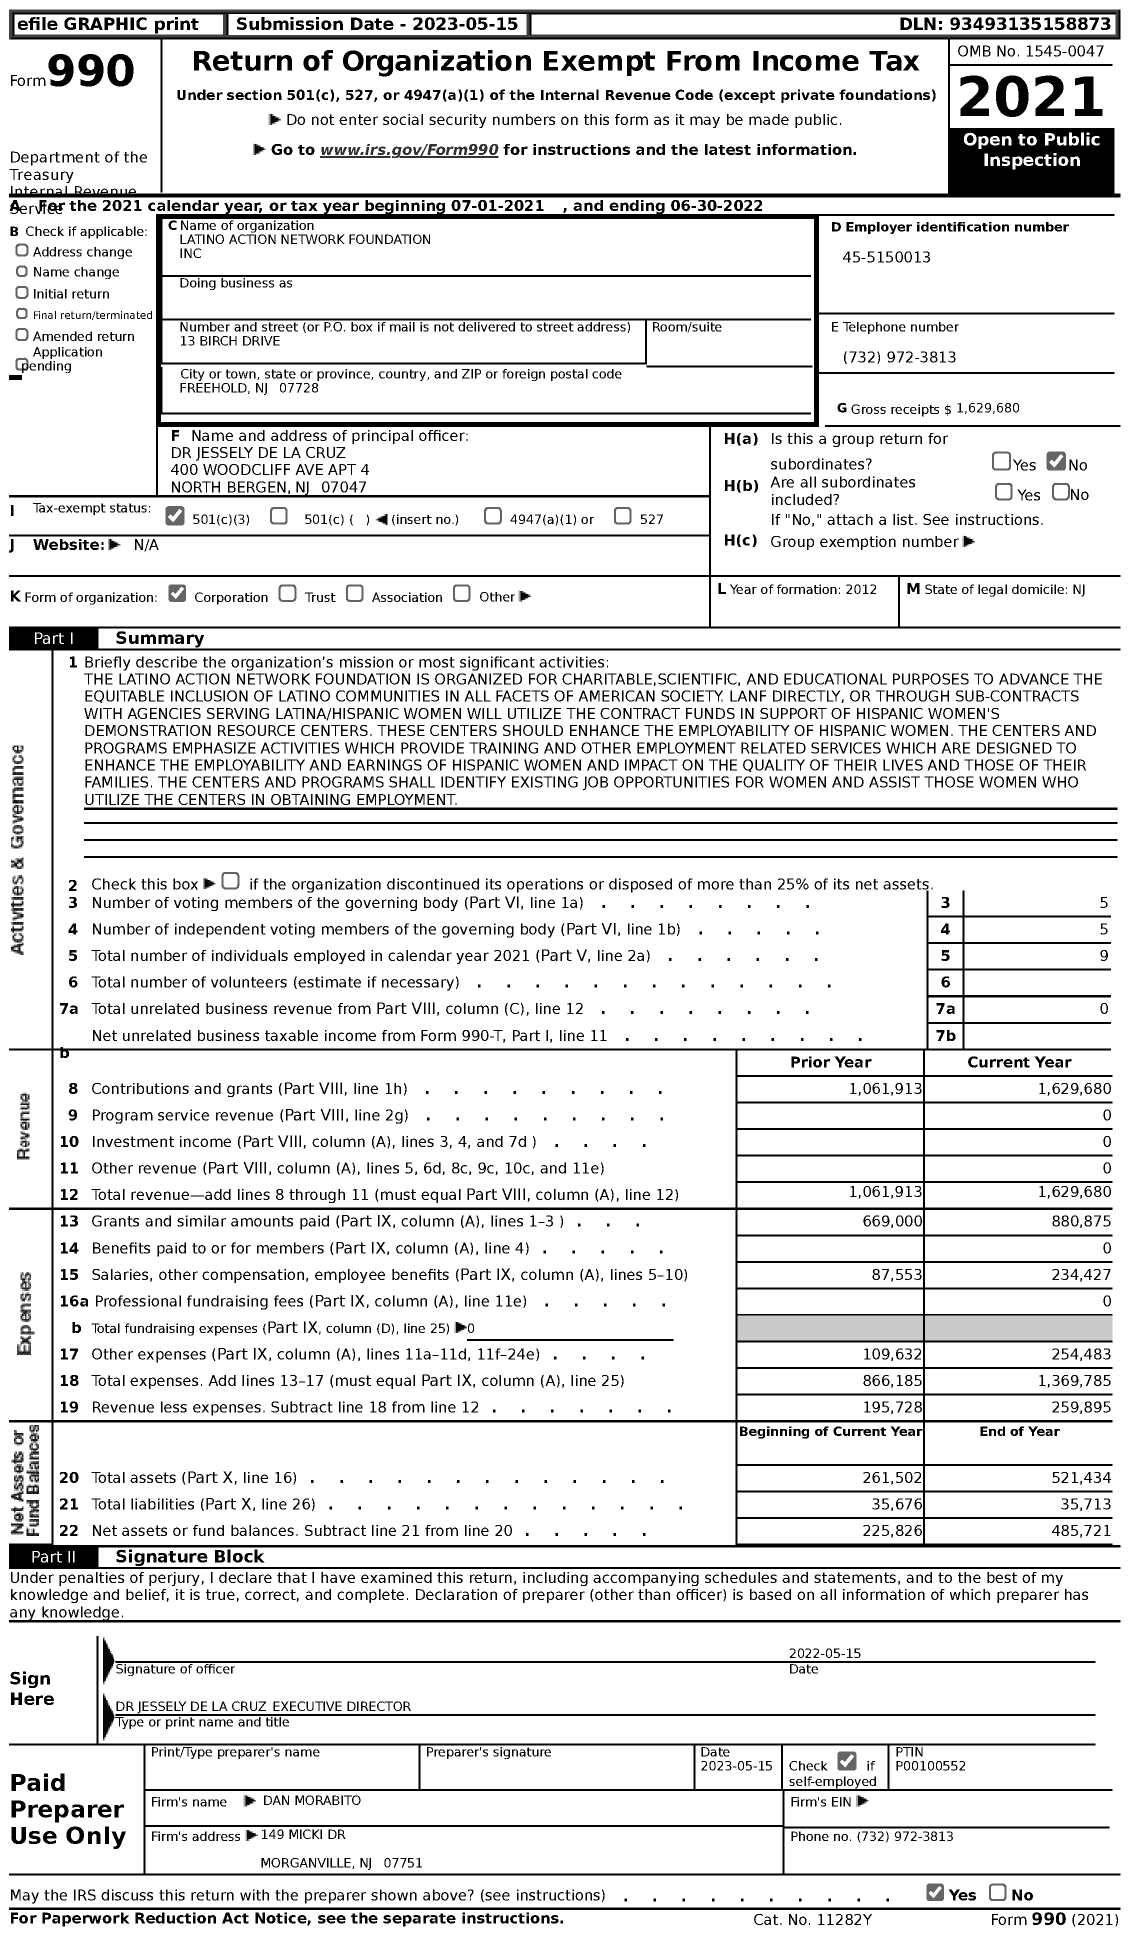 Image of first page of 2021 Form 990 for Latino Action Network Foundation